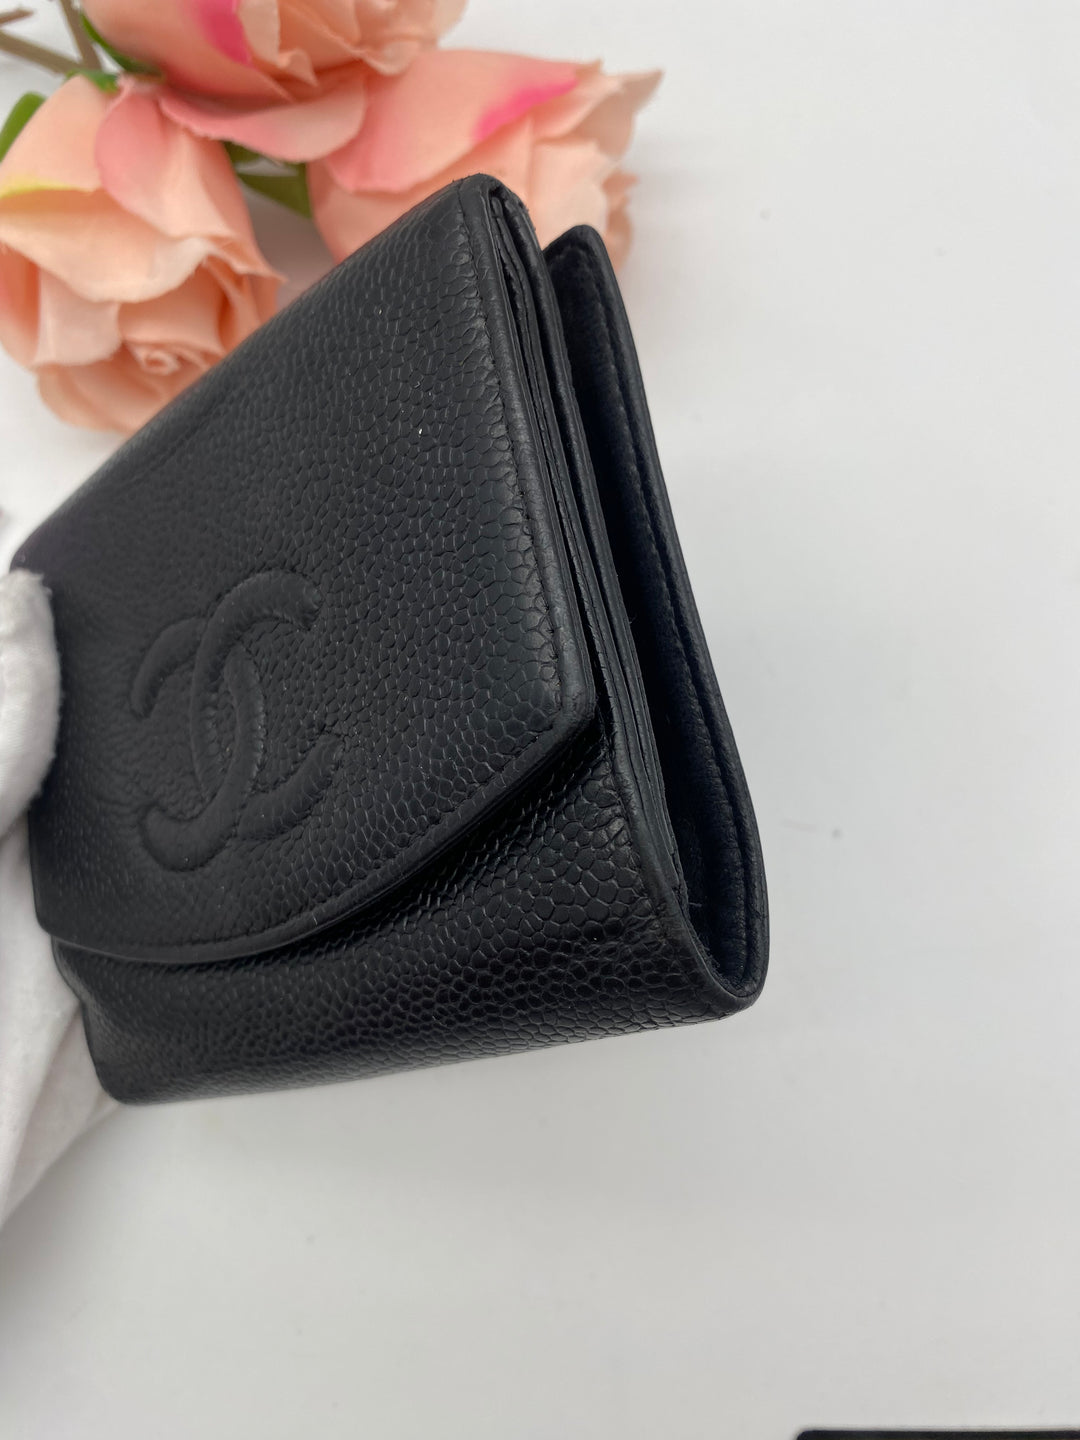 CHANEL CAVIAR TIMELESS WALLET VINTAGE